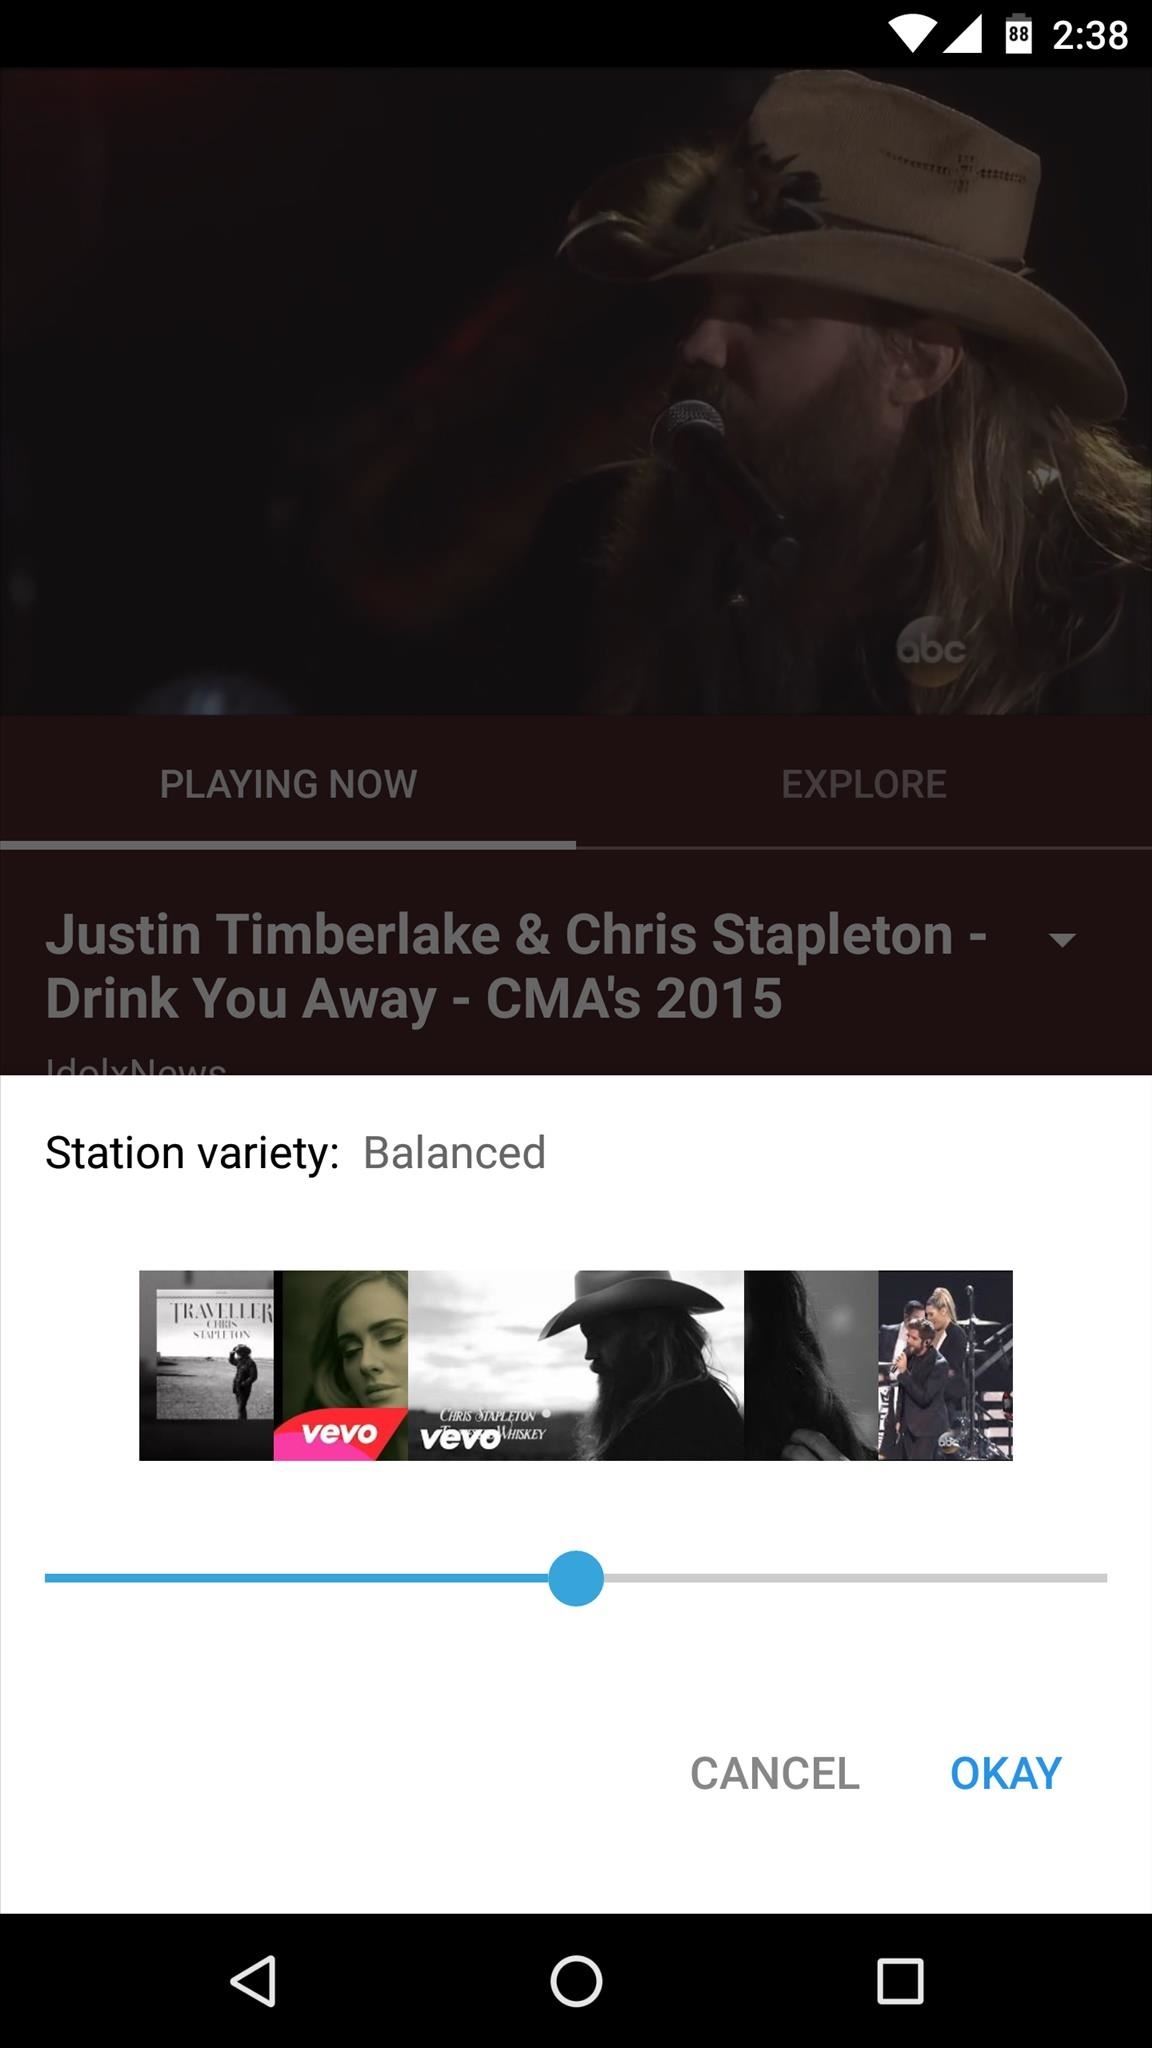 Game Changer: YouTube Music Is Live for Android & iOS